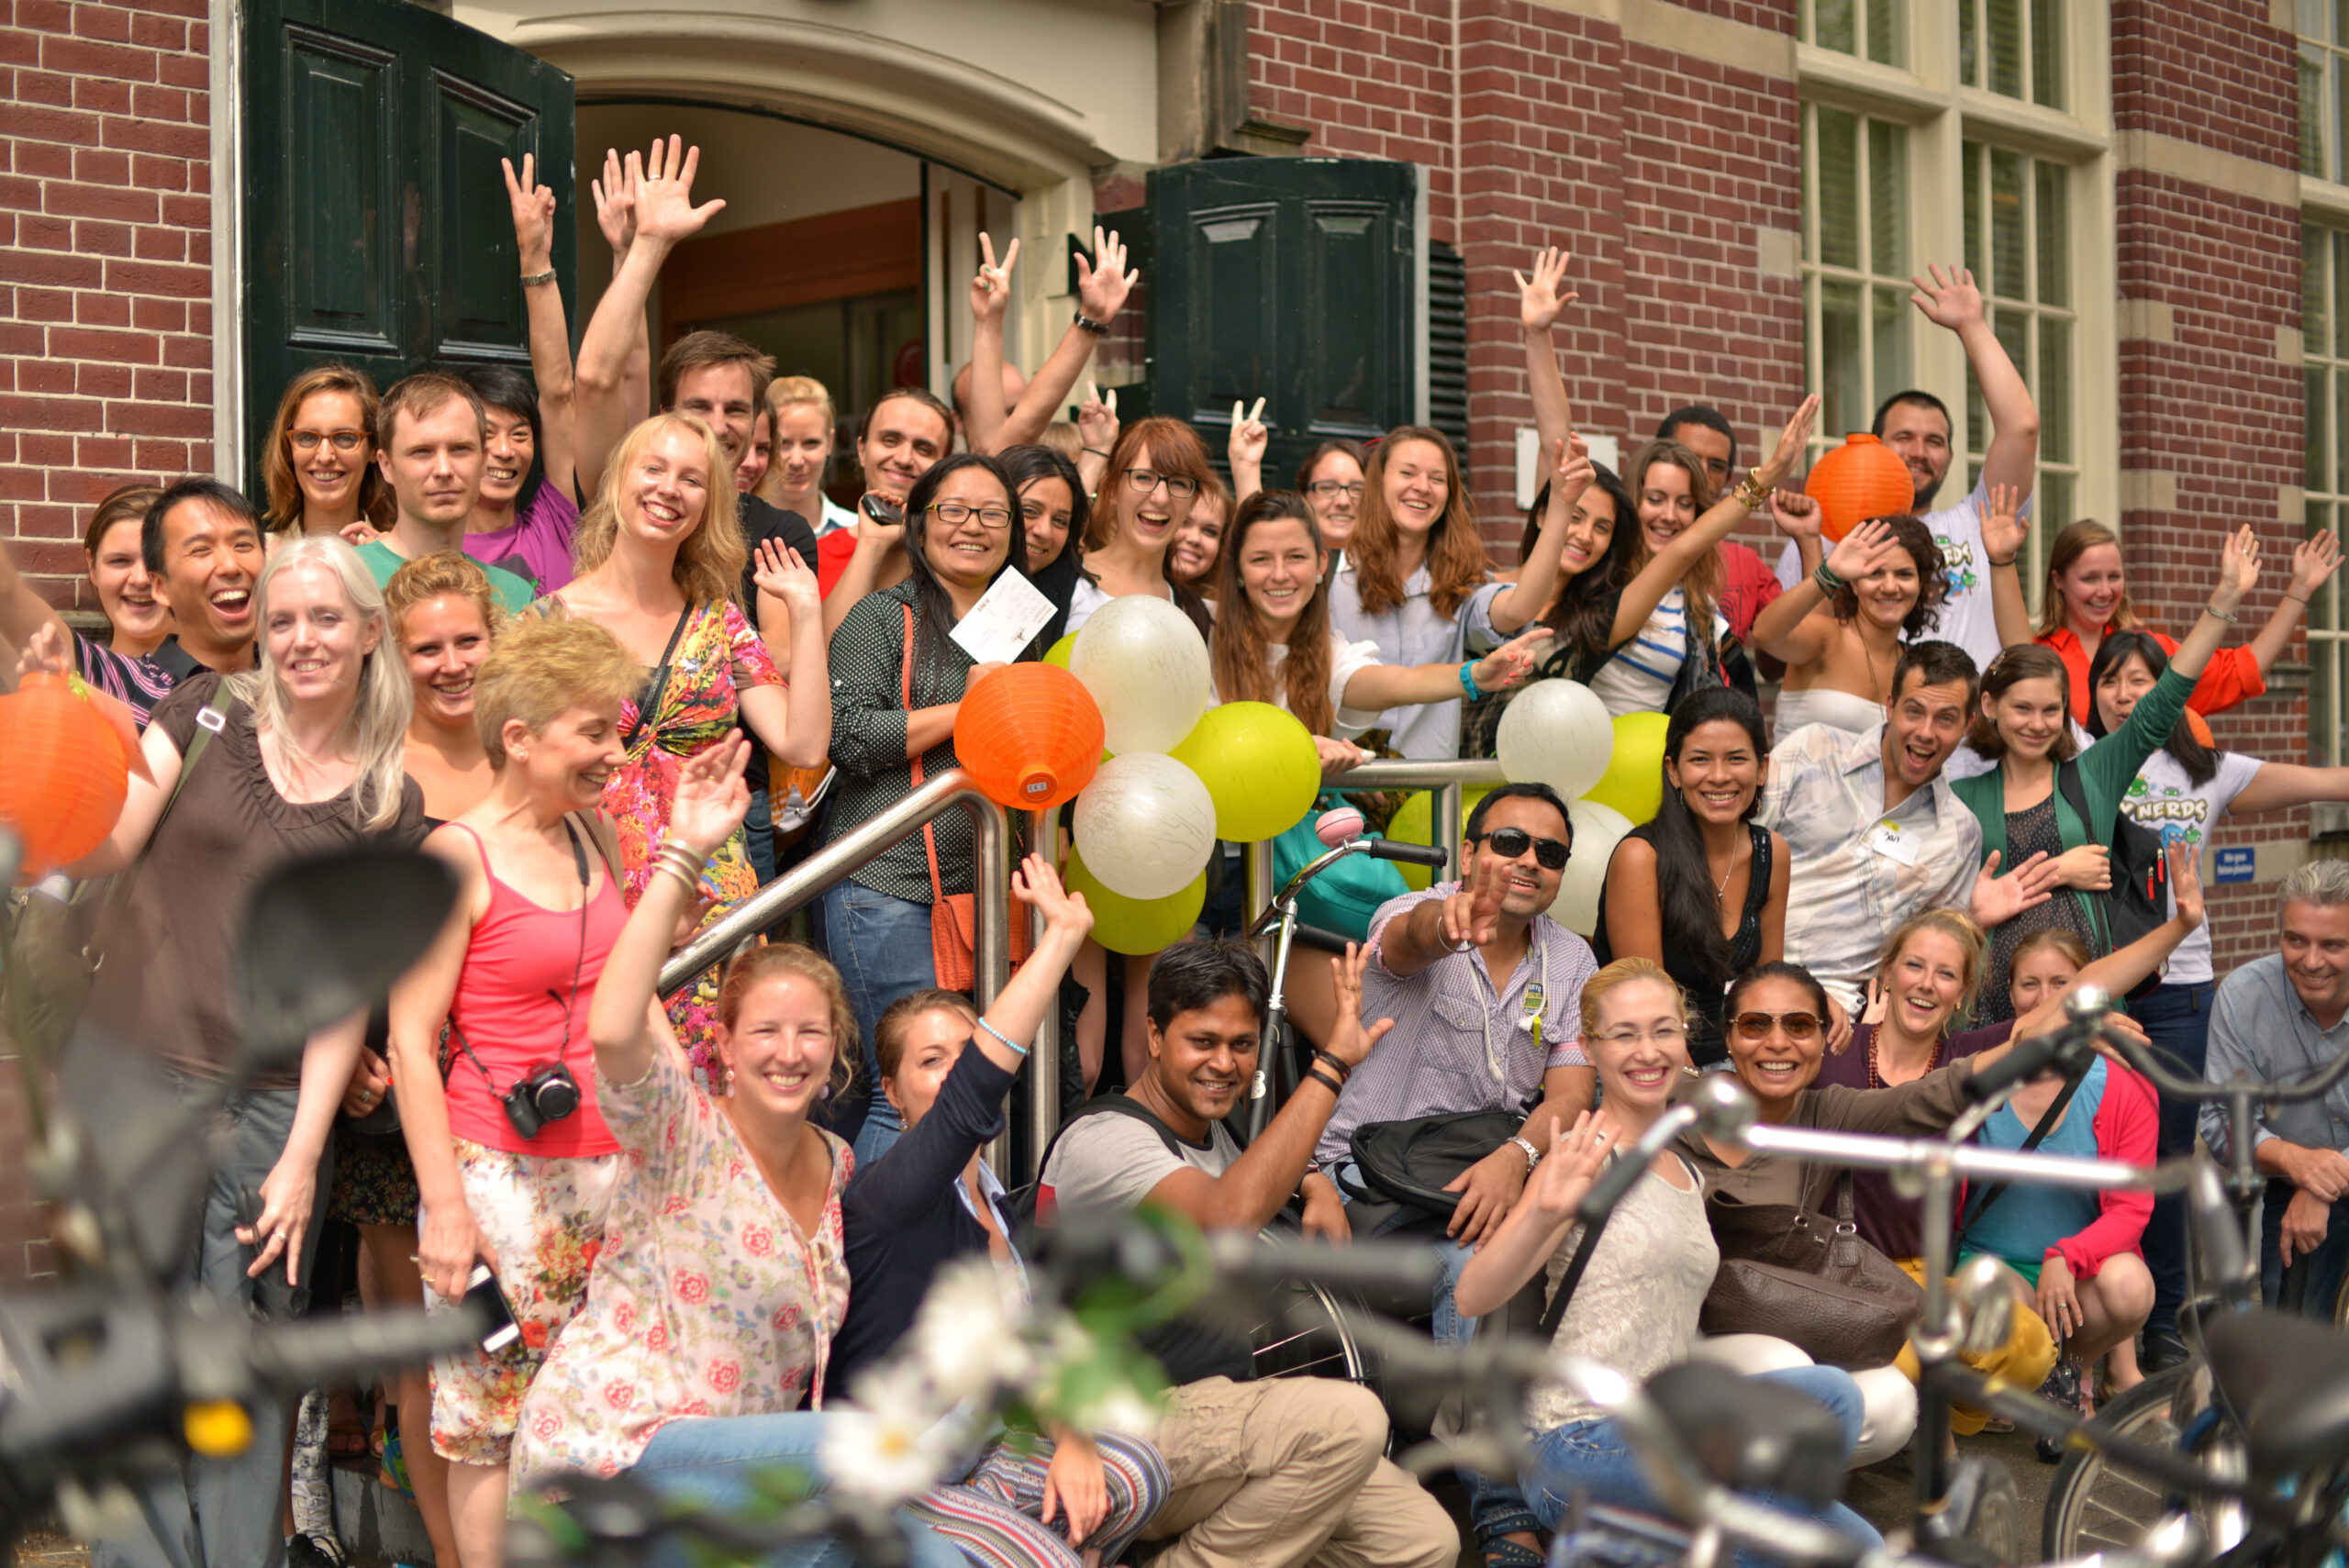 photo-of-Koentact-course-participants-during-open-day-in-Amsterdam-Dutch-language-course